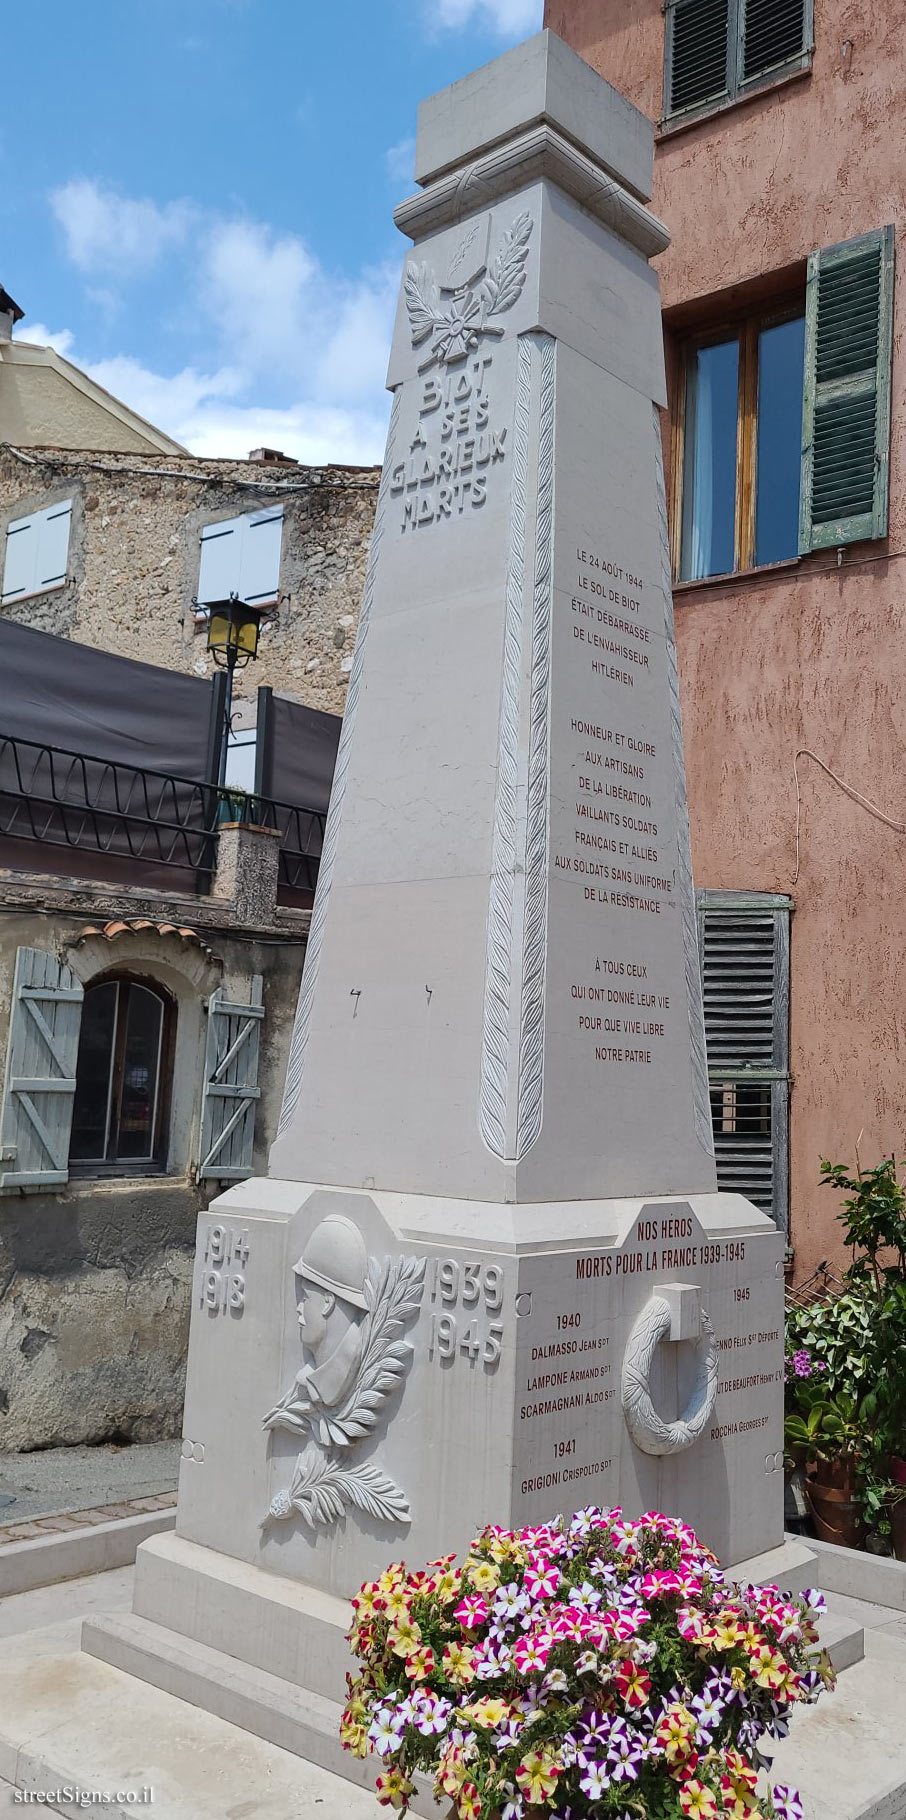 A monument to the locals who fell in World War II - Chemin durbec, 06410 Biot, France